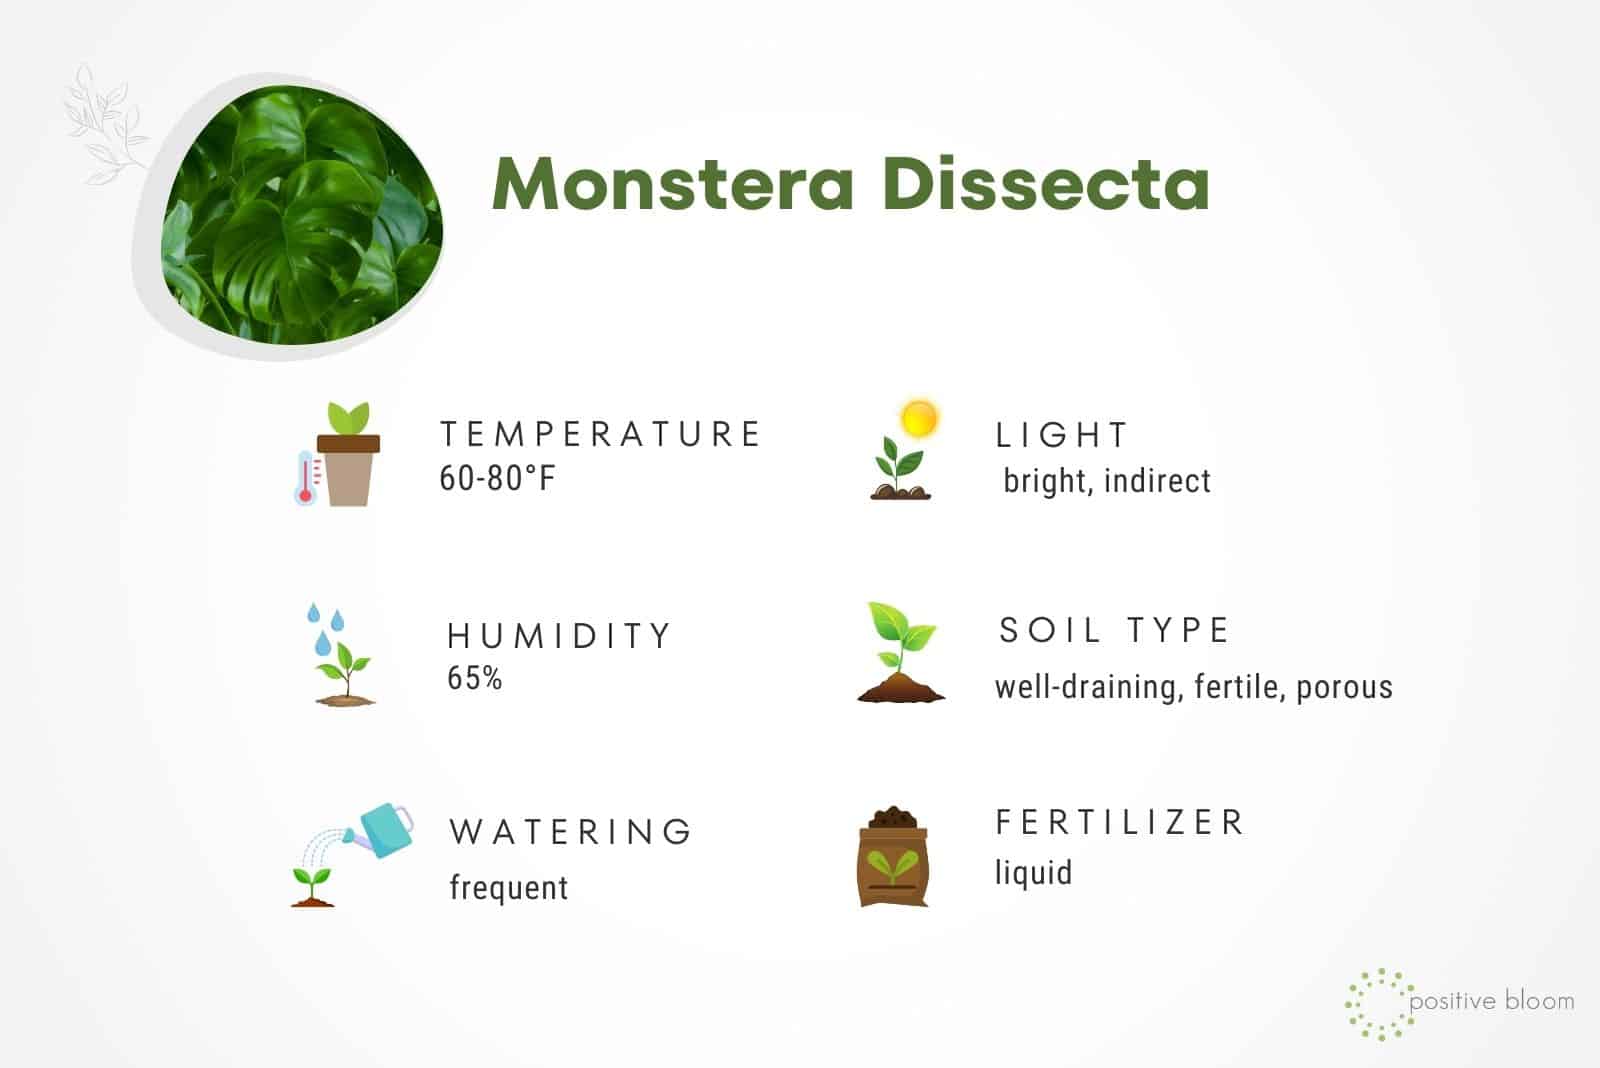 Monstera Dissecta care tips